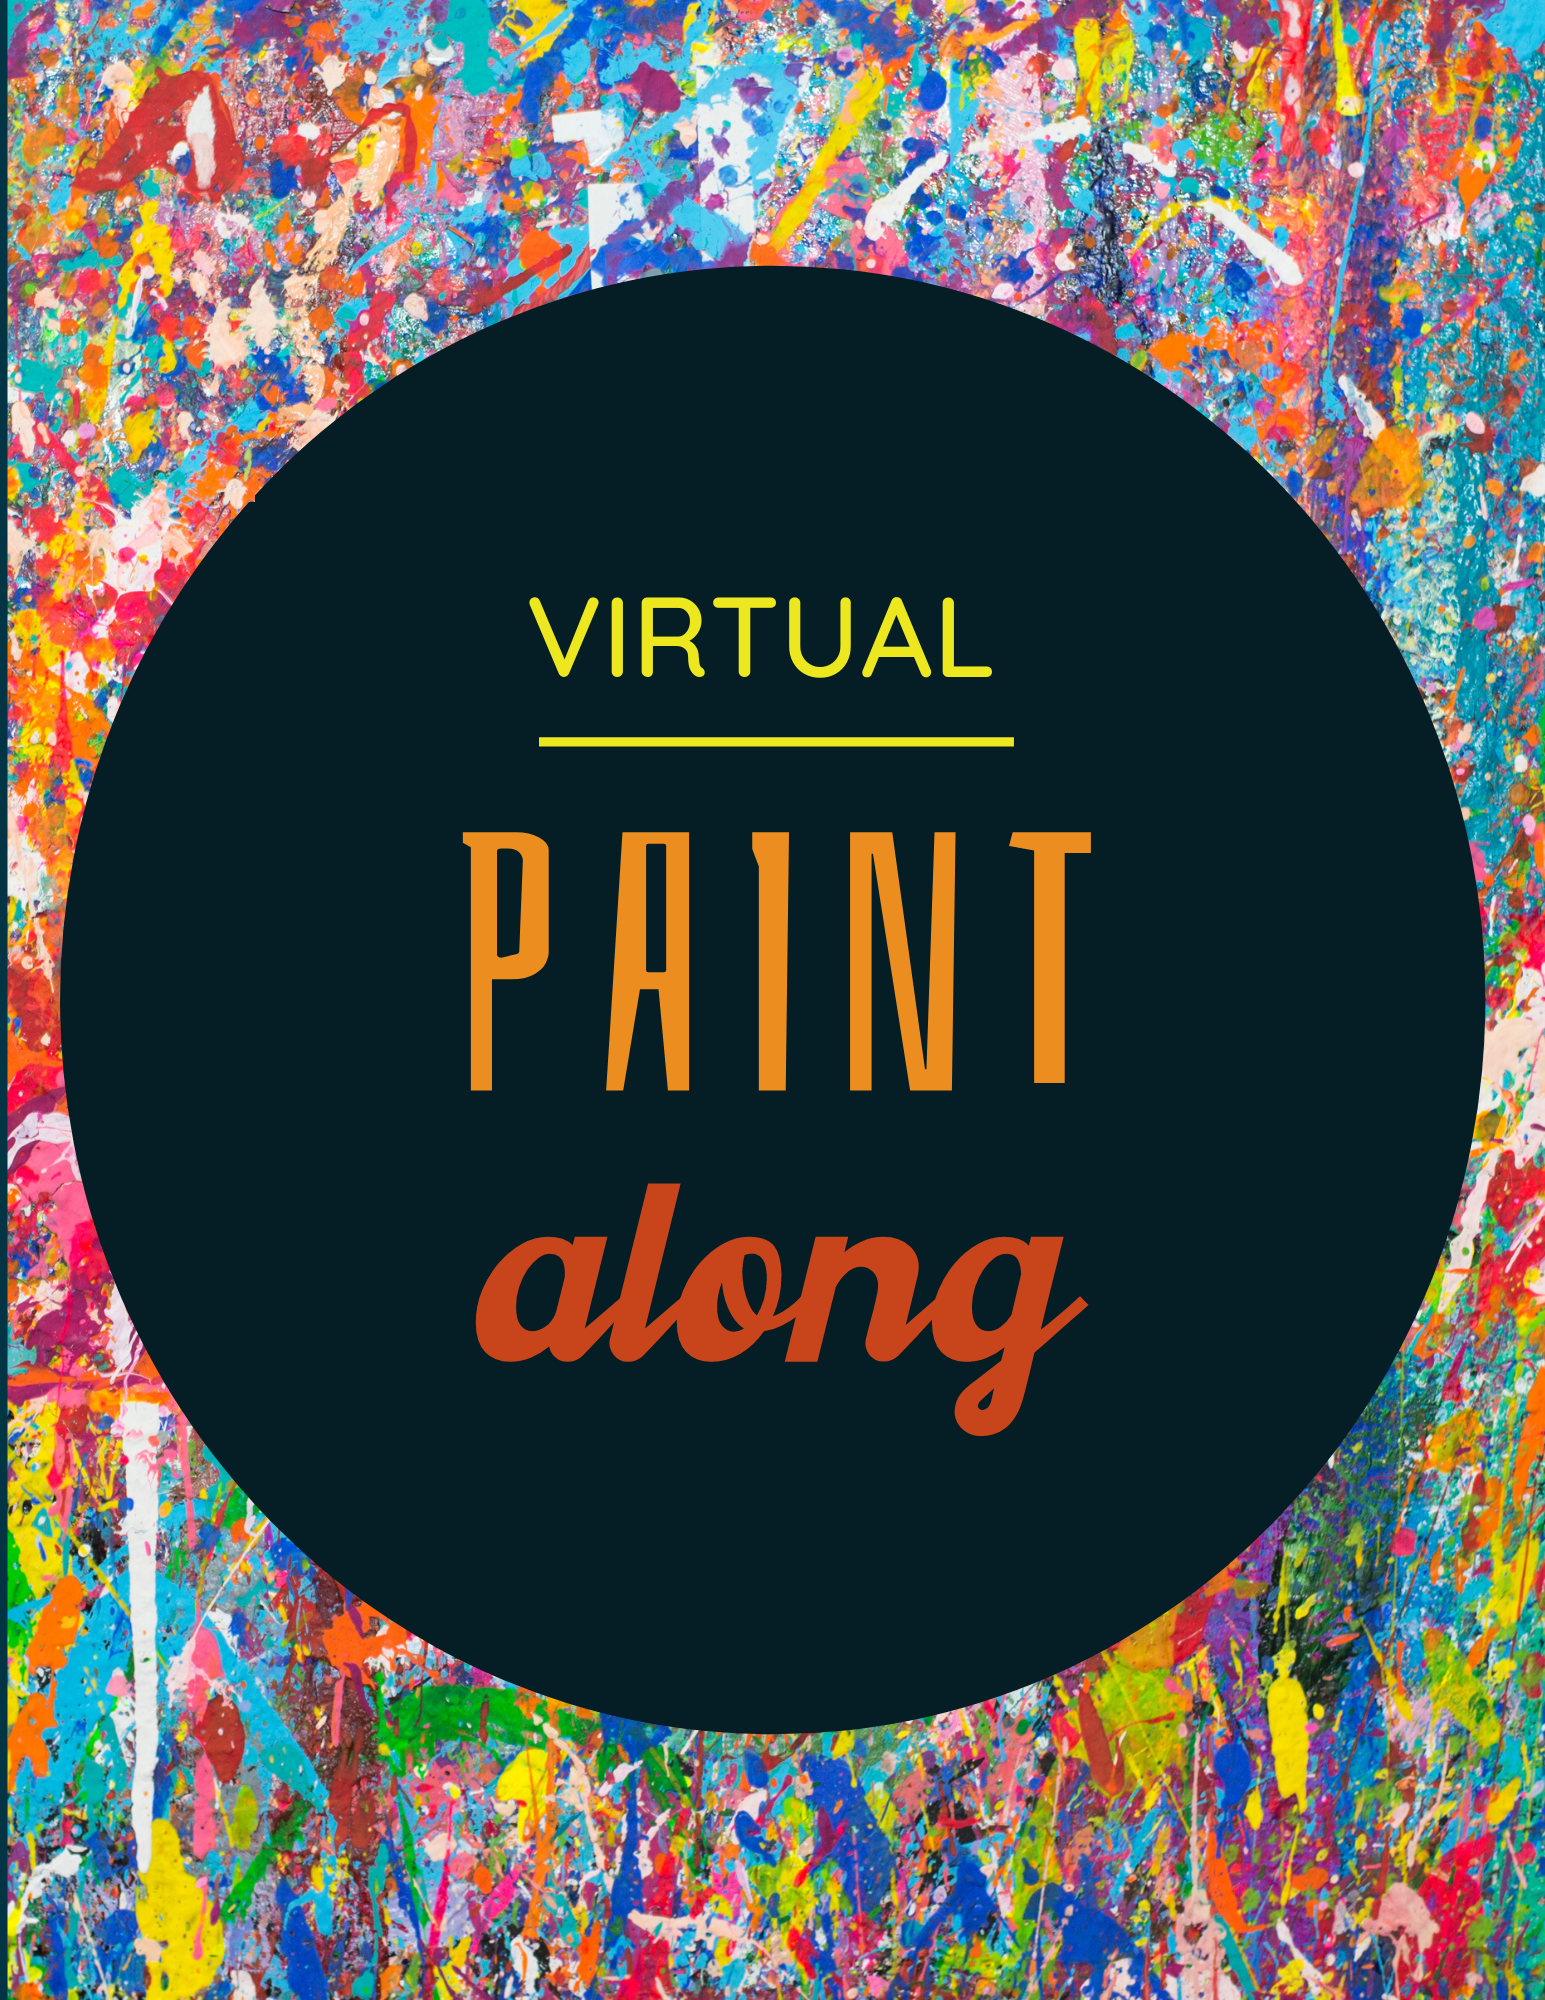 multicolored background with dark circle in middle with text "virtual paint along"